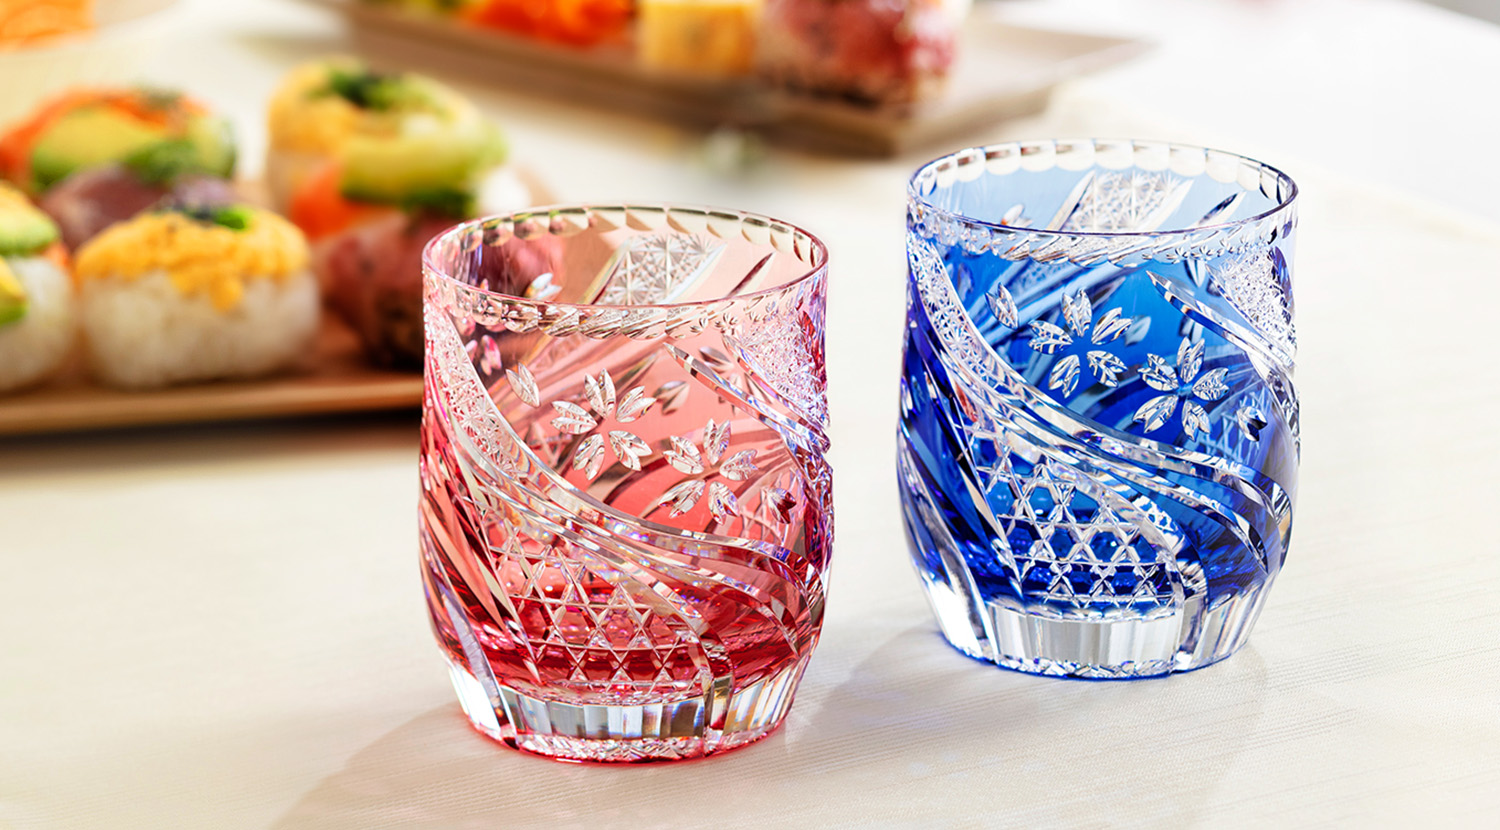 KAGAMI Kagami Crystal │The Ultimate in Glass of which Japan can 